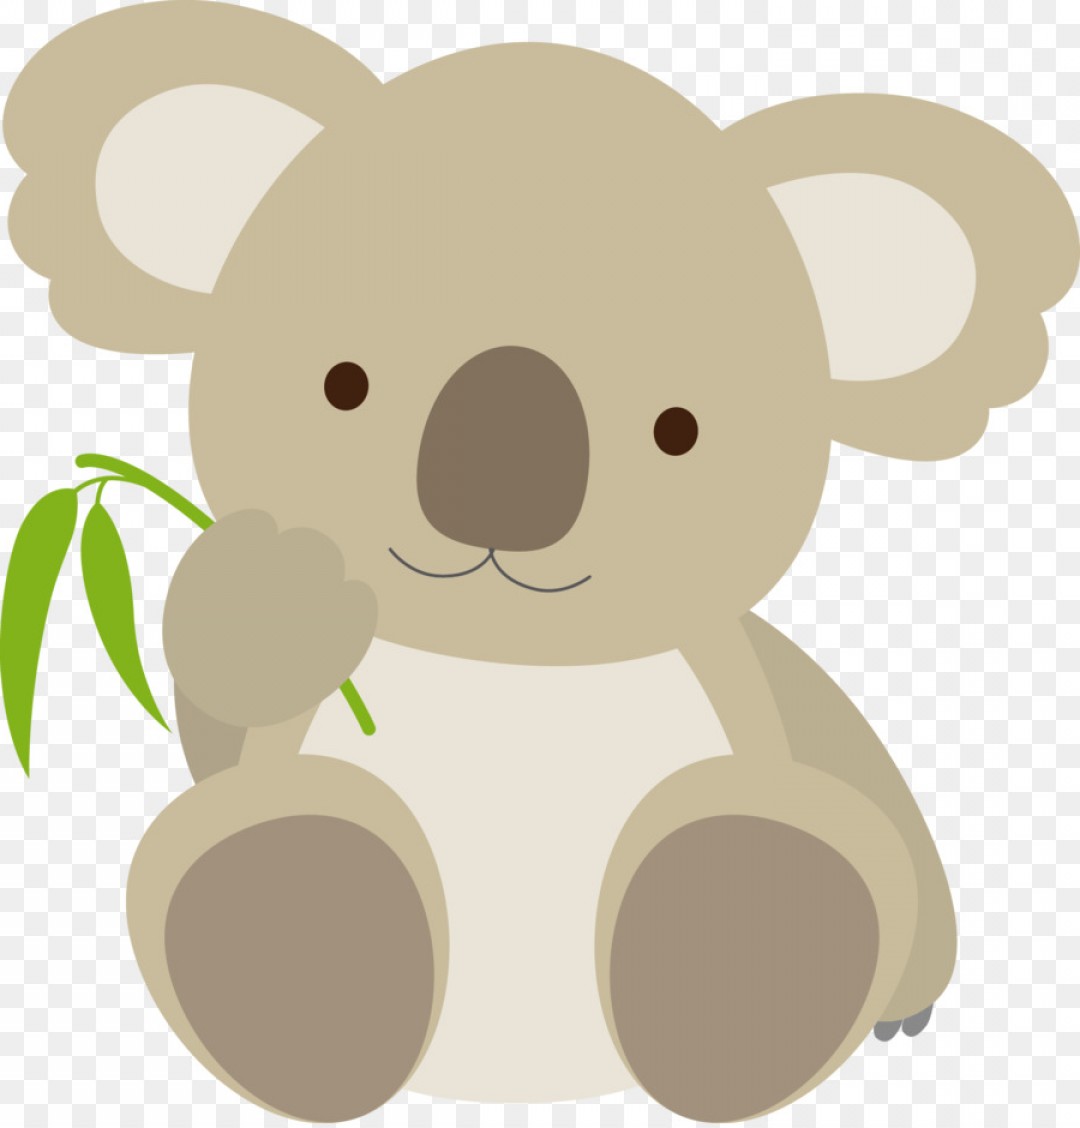 The best free Koala vector images. Download from 48 free